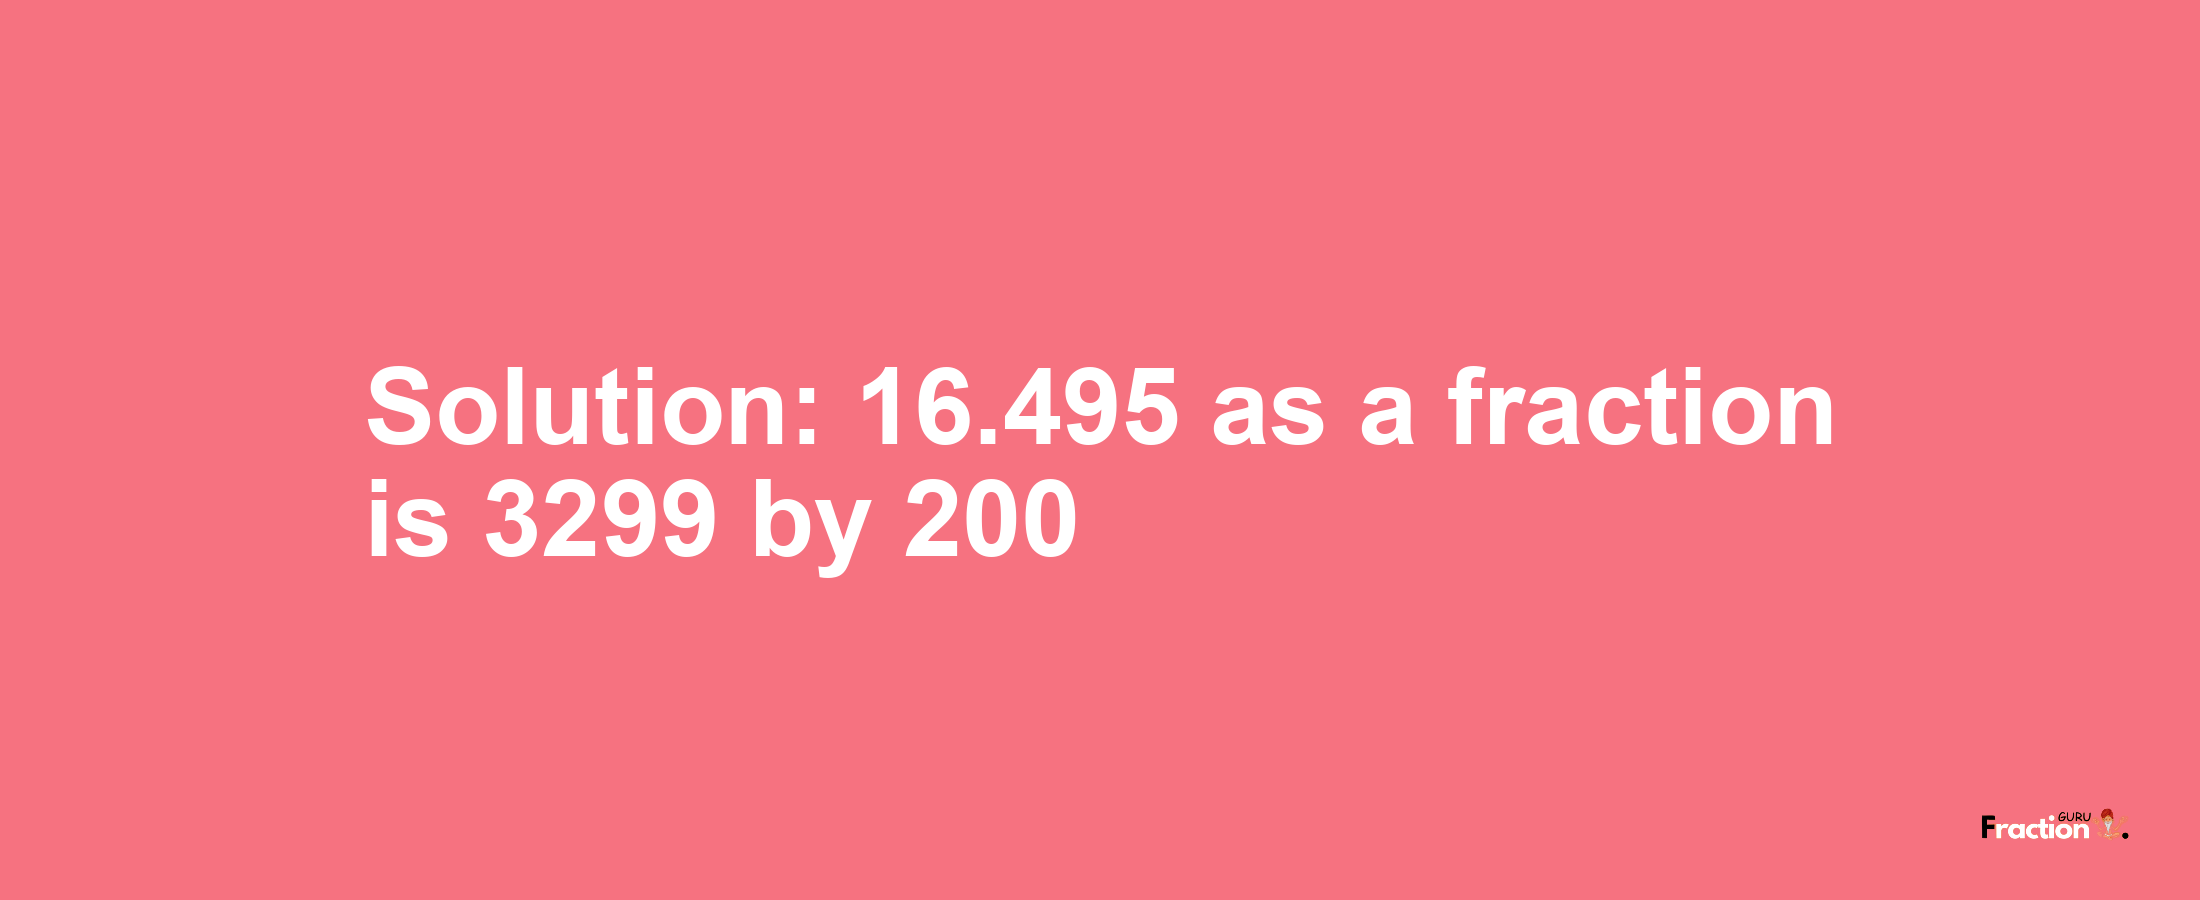 Solution:16.495 as a fraction is 3299/200